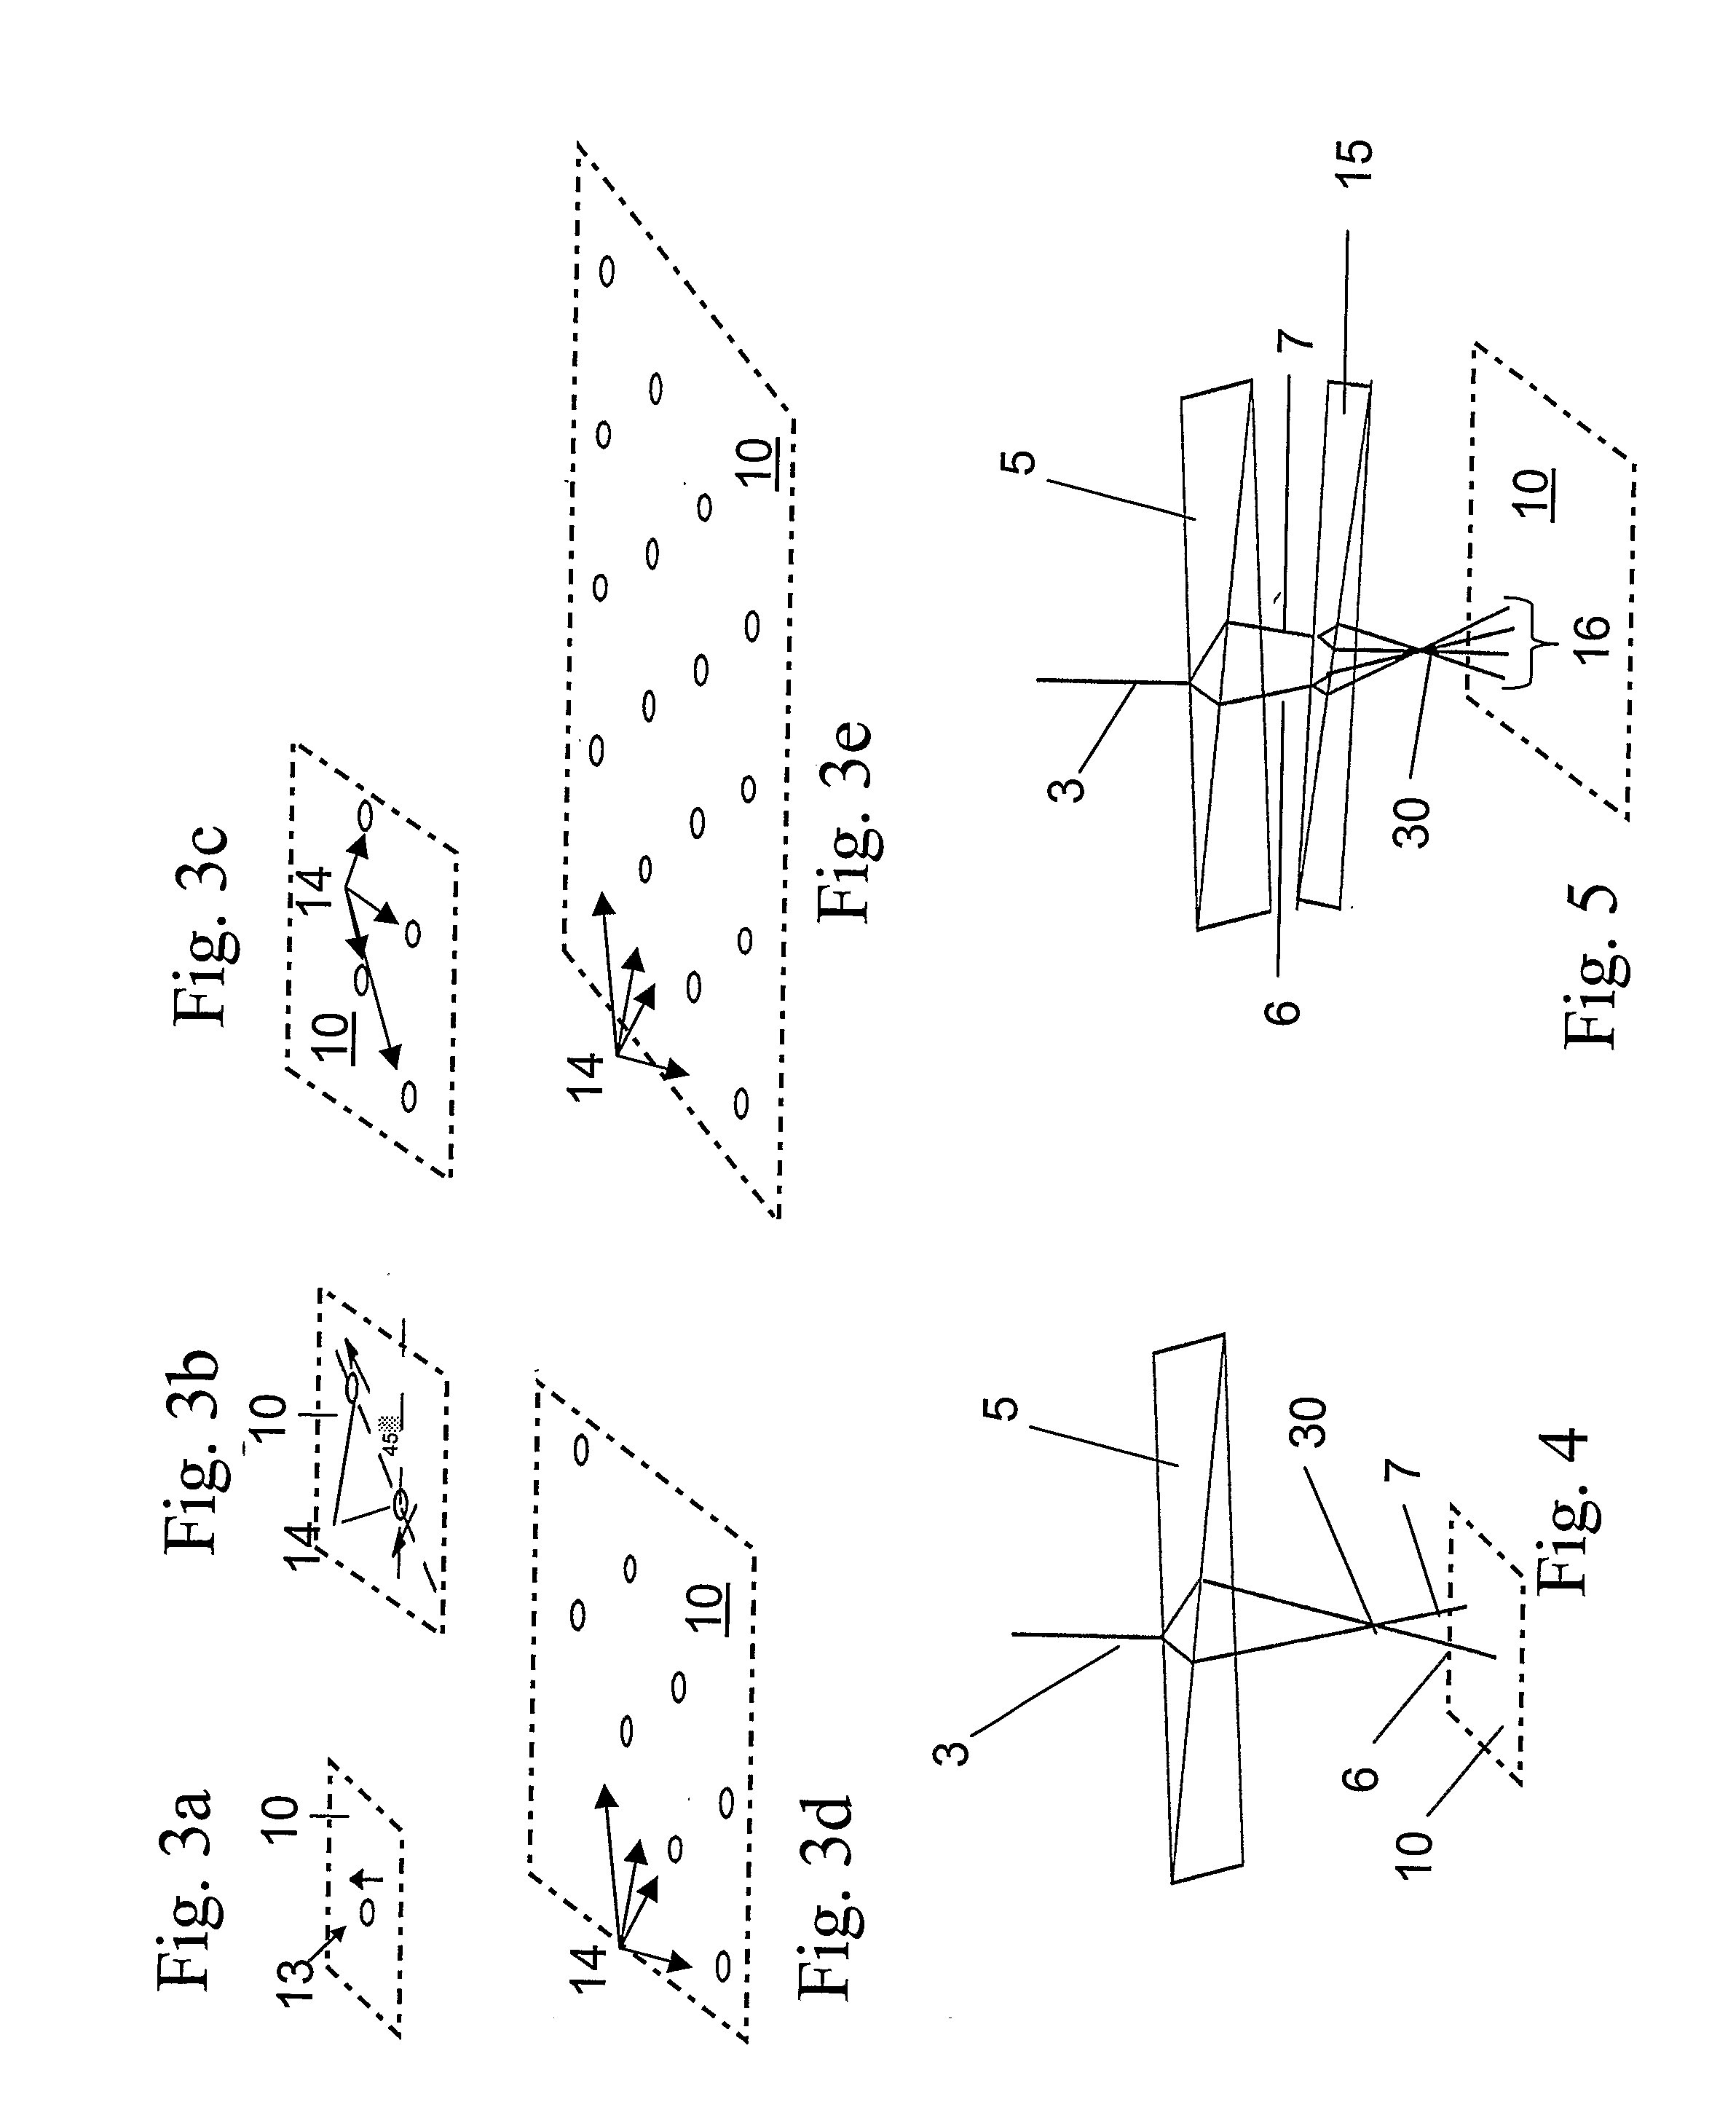 Optical Scanning Device and Method of Deriving Same